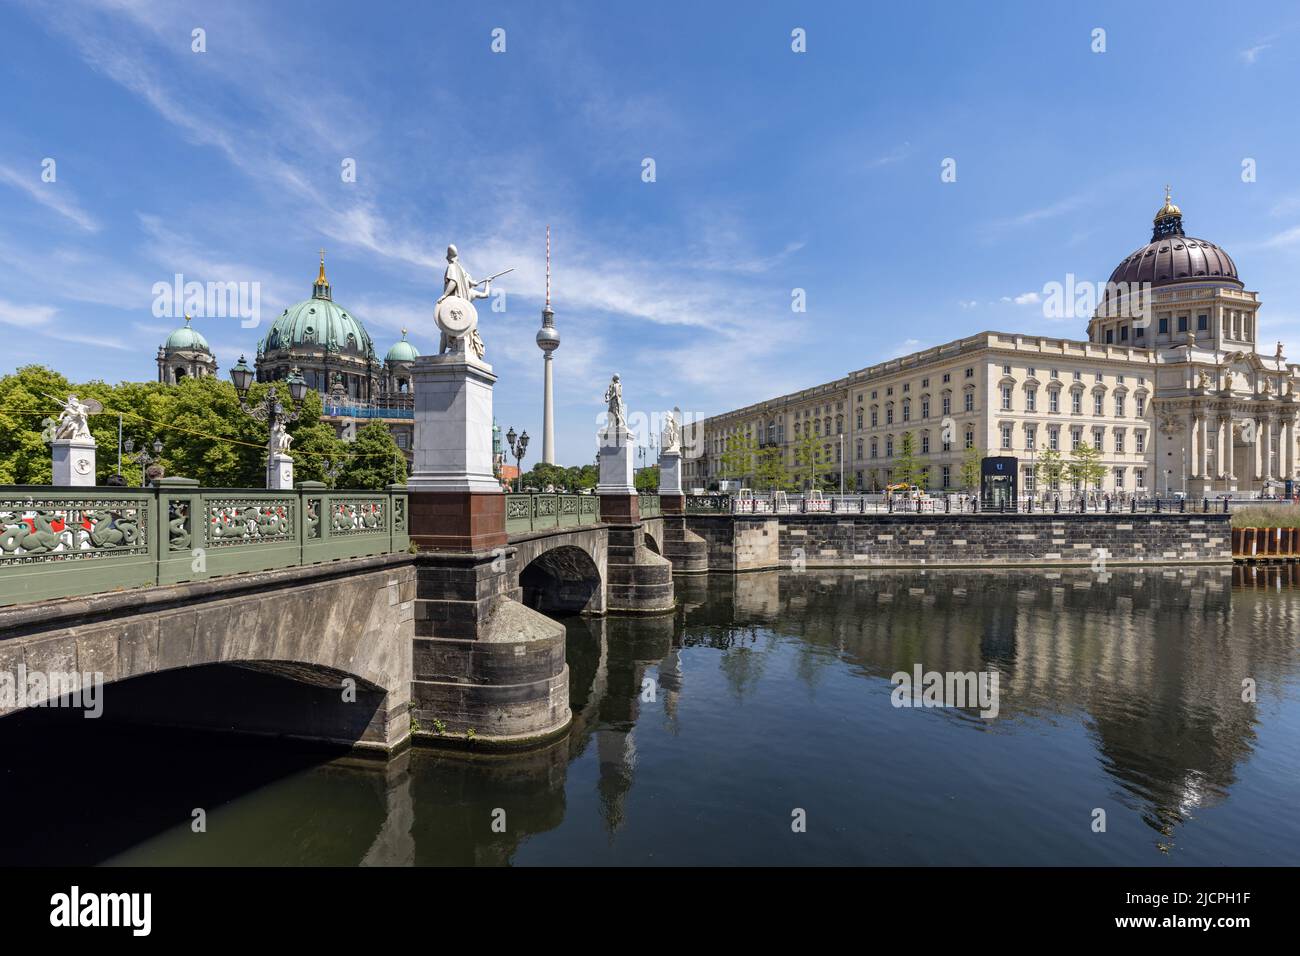 The Schloss Bridge over the Spree canal, with the Berliner Dom Cathedral on the left and the rebuilt Berlin City Palace on the right, Berlin. Stock Photo